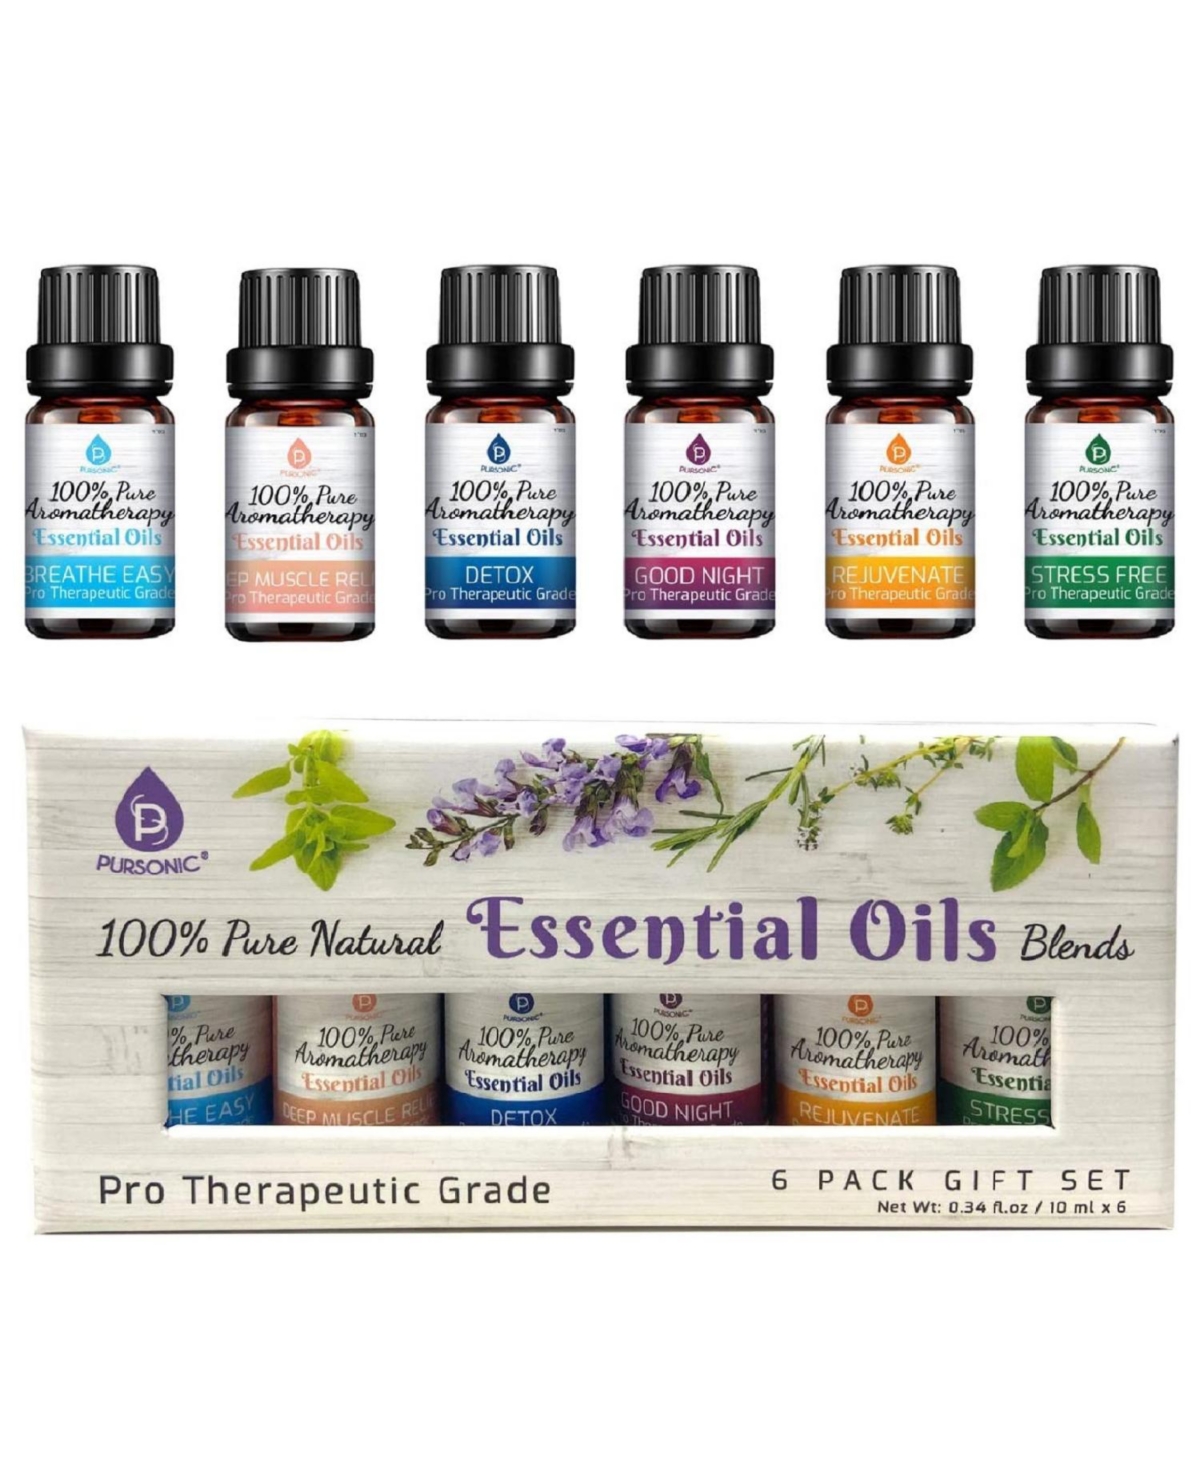 6 Pack of 100% Pure Essential Aromatherapy Oils Blends - Natural